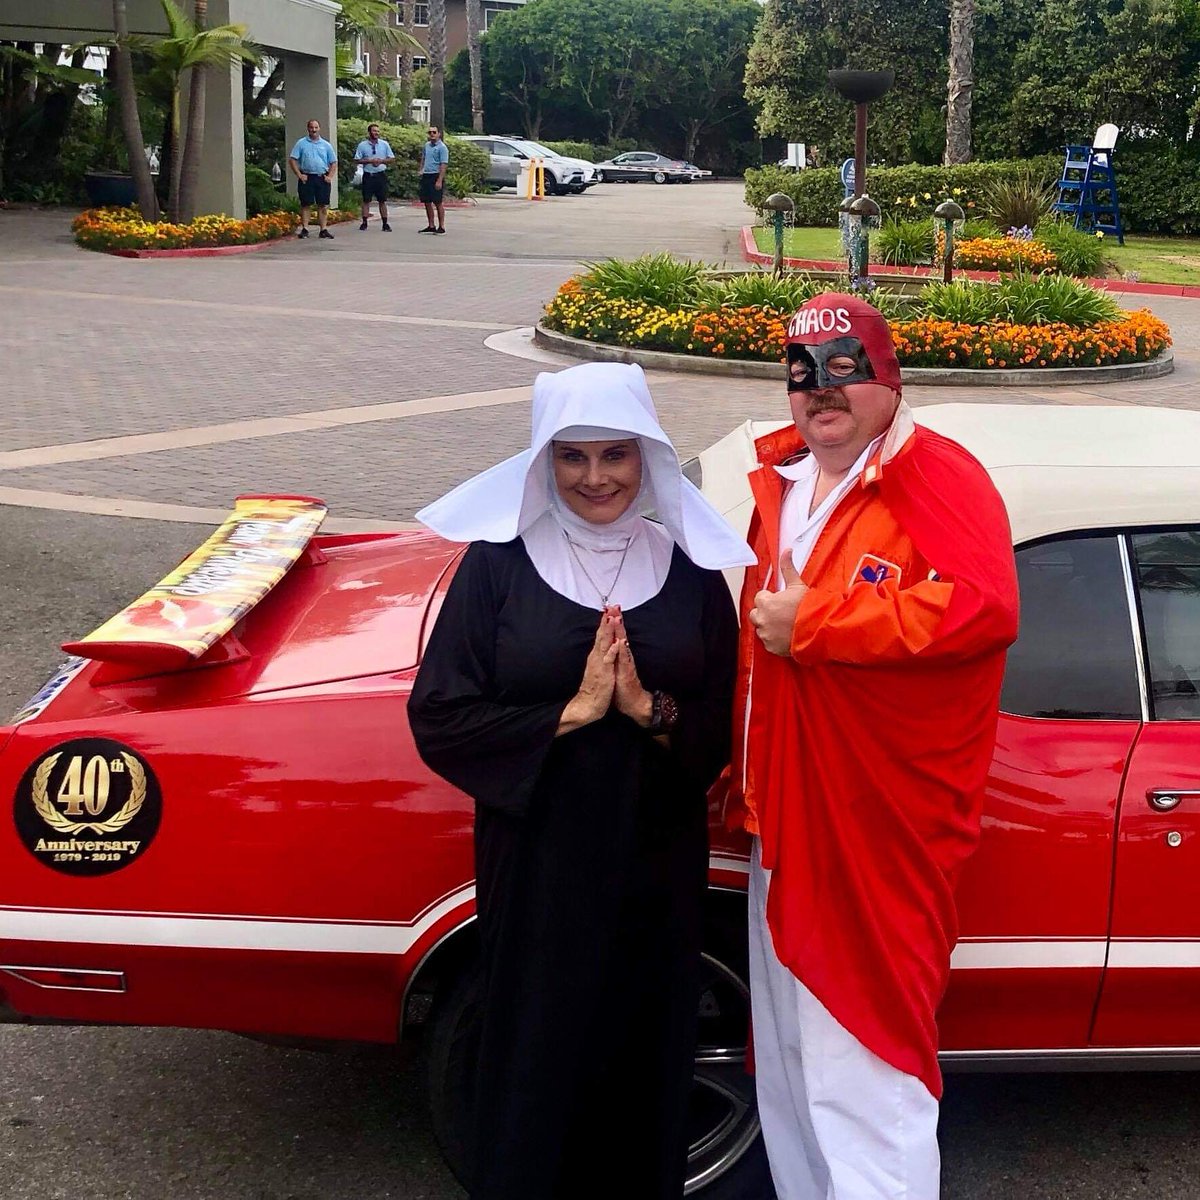 Welcome to day 286 of 365 for #YearOfChaos. DUN DUN DUNNNN!

#SundayNunDay HIM found a a Nun  #CannonballRunII #EpicRoadTrip

#CannonballRun #Cannonball #CaptainChaos #NoExcuses2019